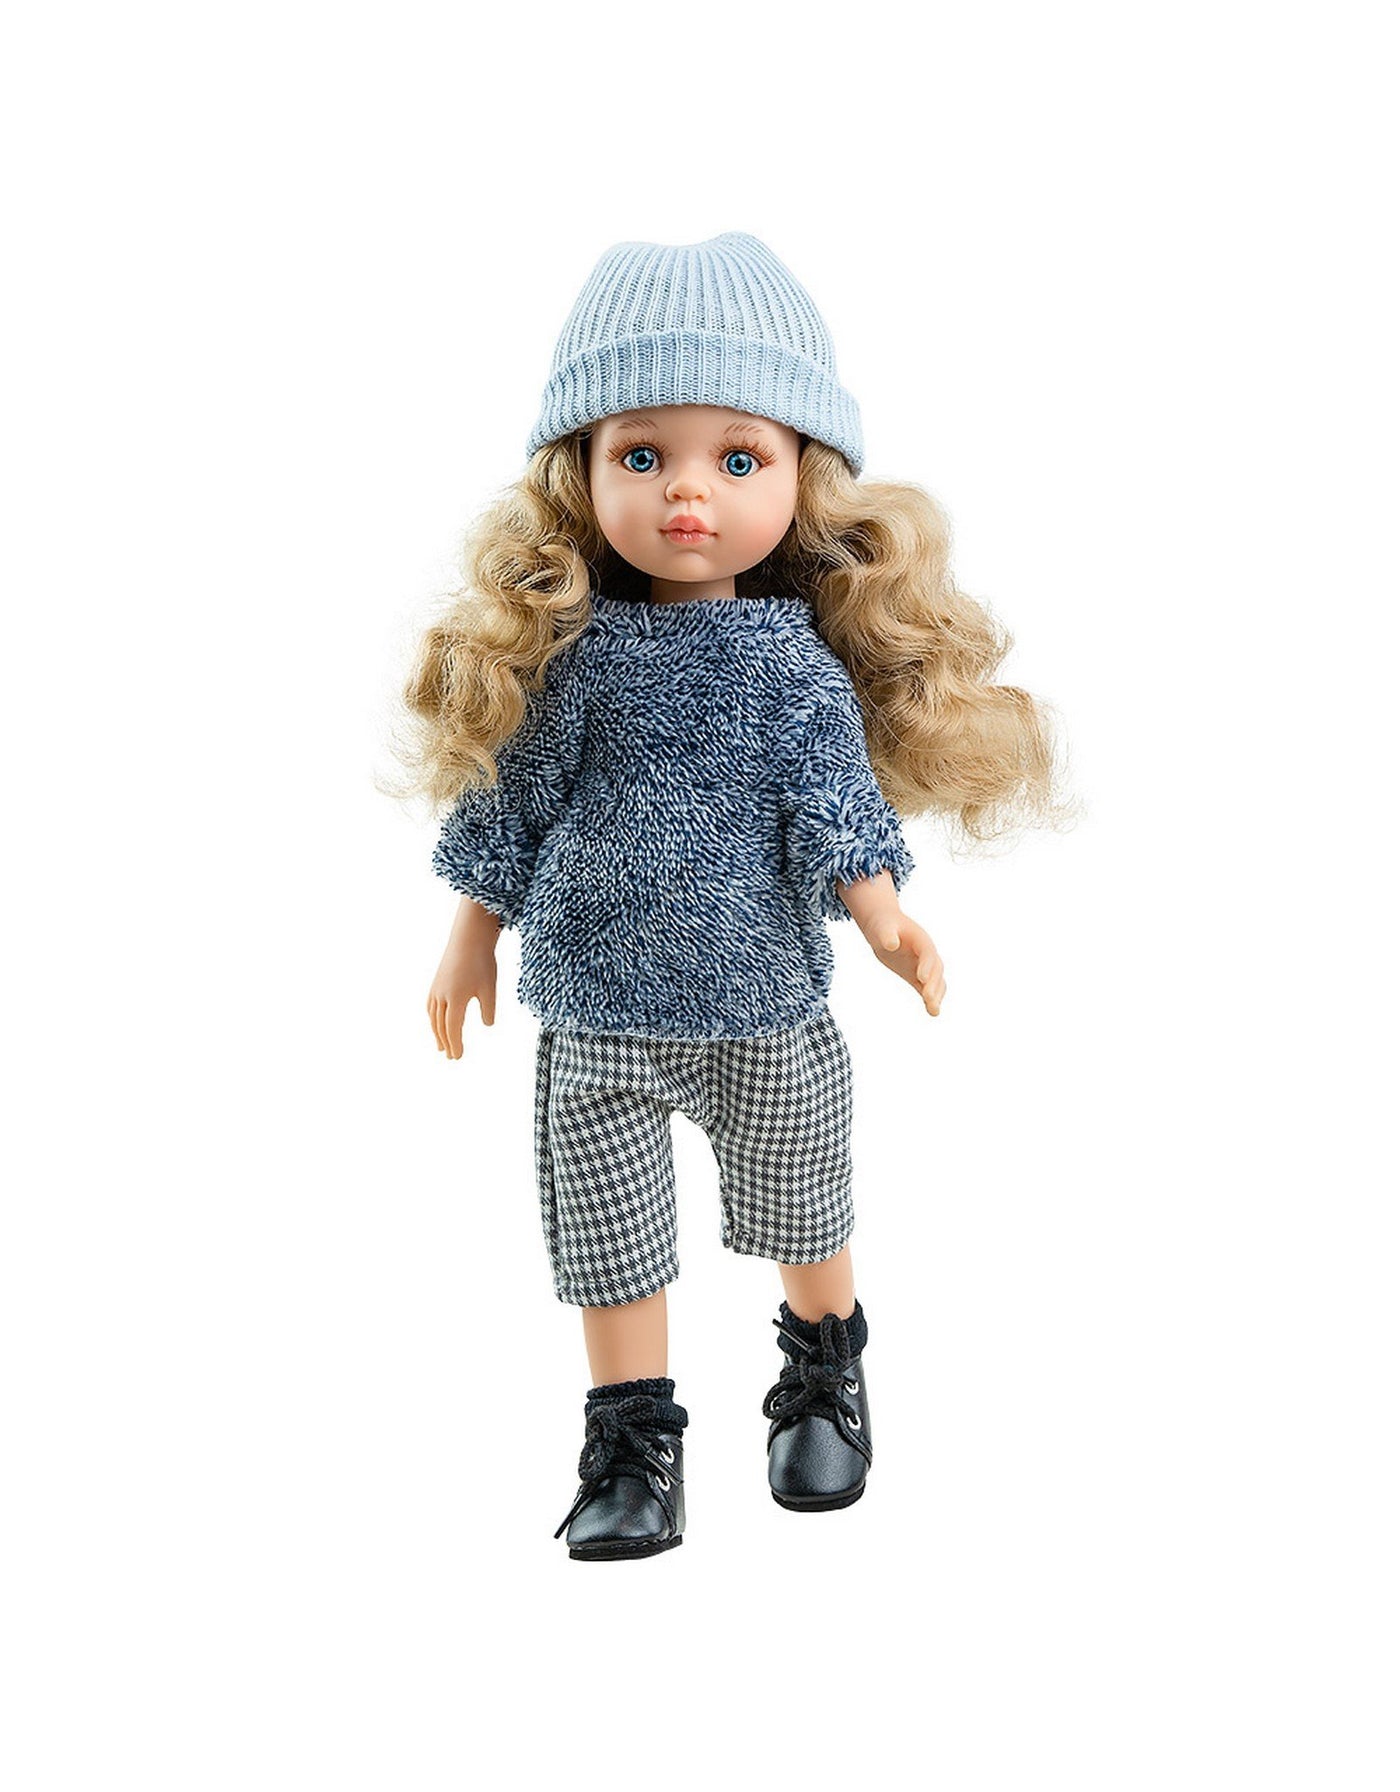 Las Amigas Doll - Carla with blue sweater and three-quarter pants and a hat - Paola ReinD